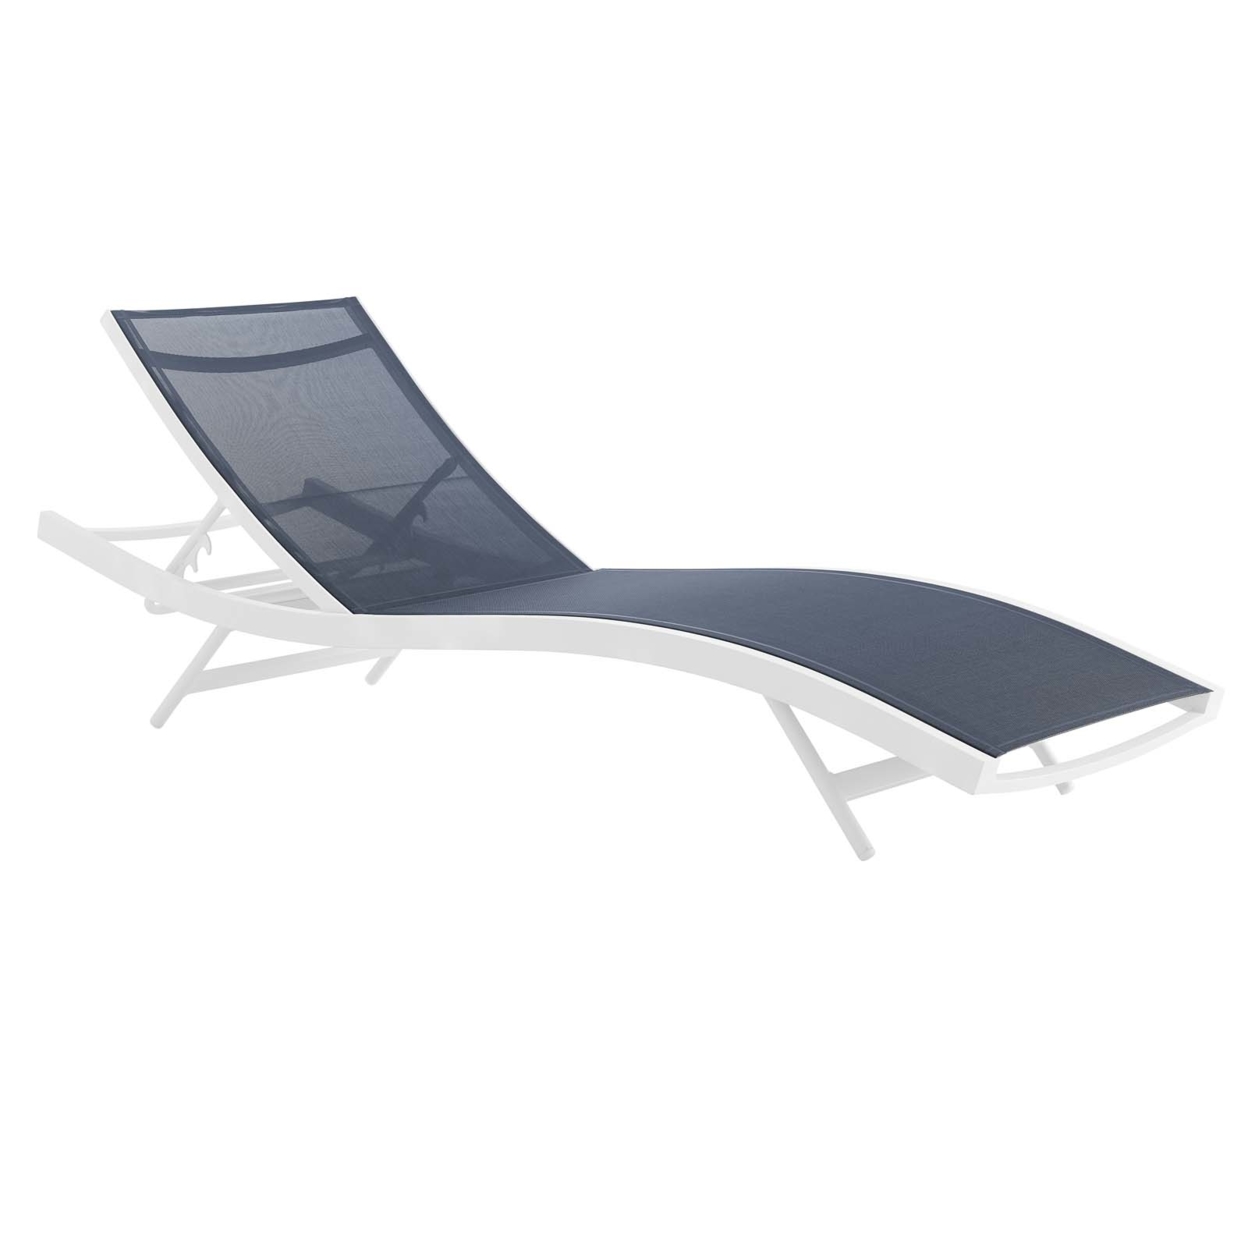 Glimpse Outdoor Patio Mesh Chaise Lounge Chair (3300-WHI-NAV)